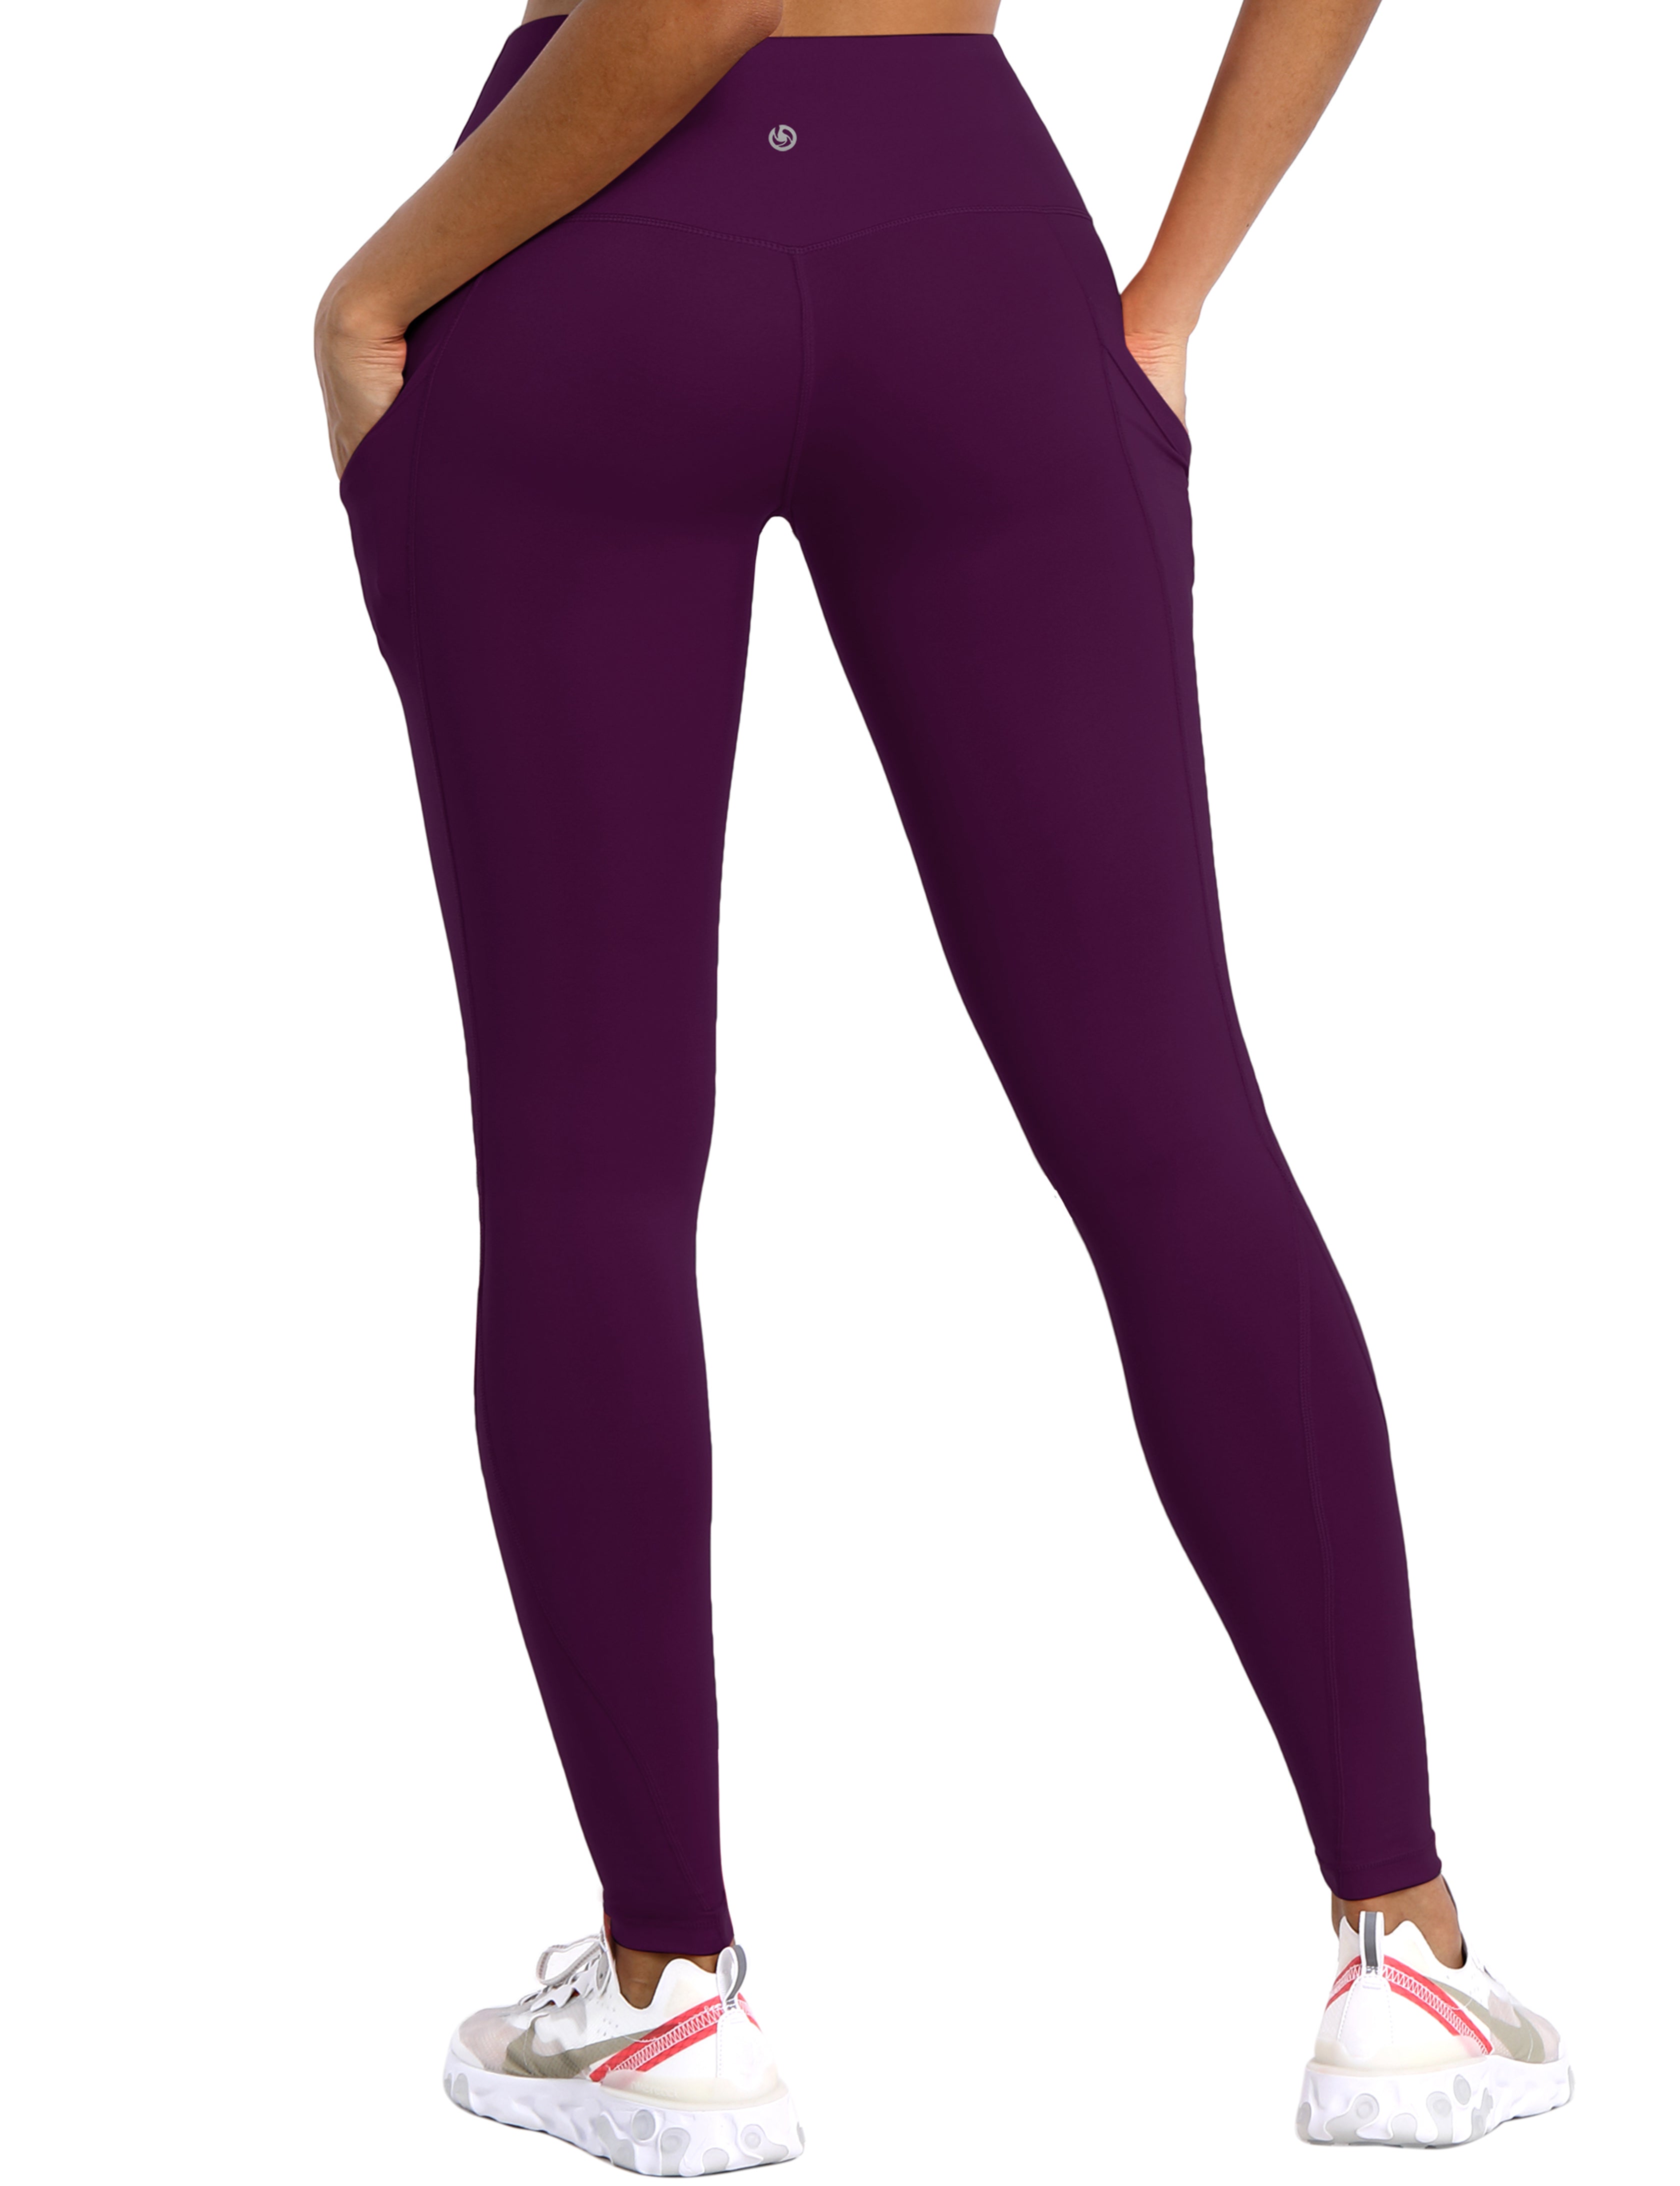 High Waist Side Pockets Pilates Pants plum 75% Nylon, 25% Spandex Fabric doesn't attract lint easily 4-way stretch No see-through Moisture-wicking Tummy control Inner pocket